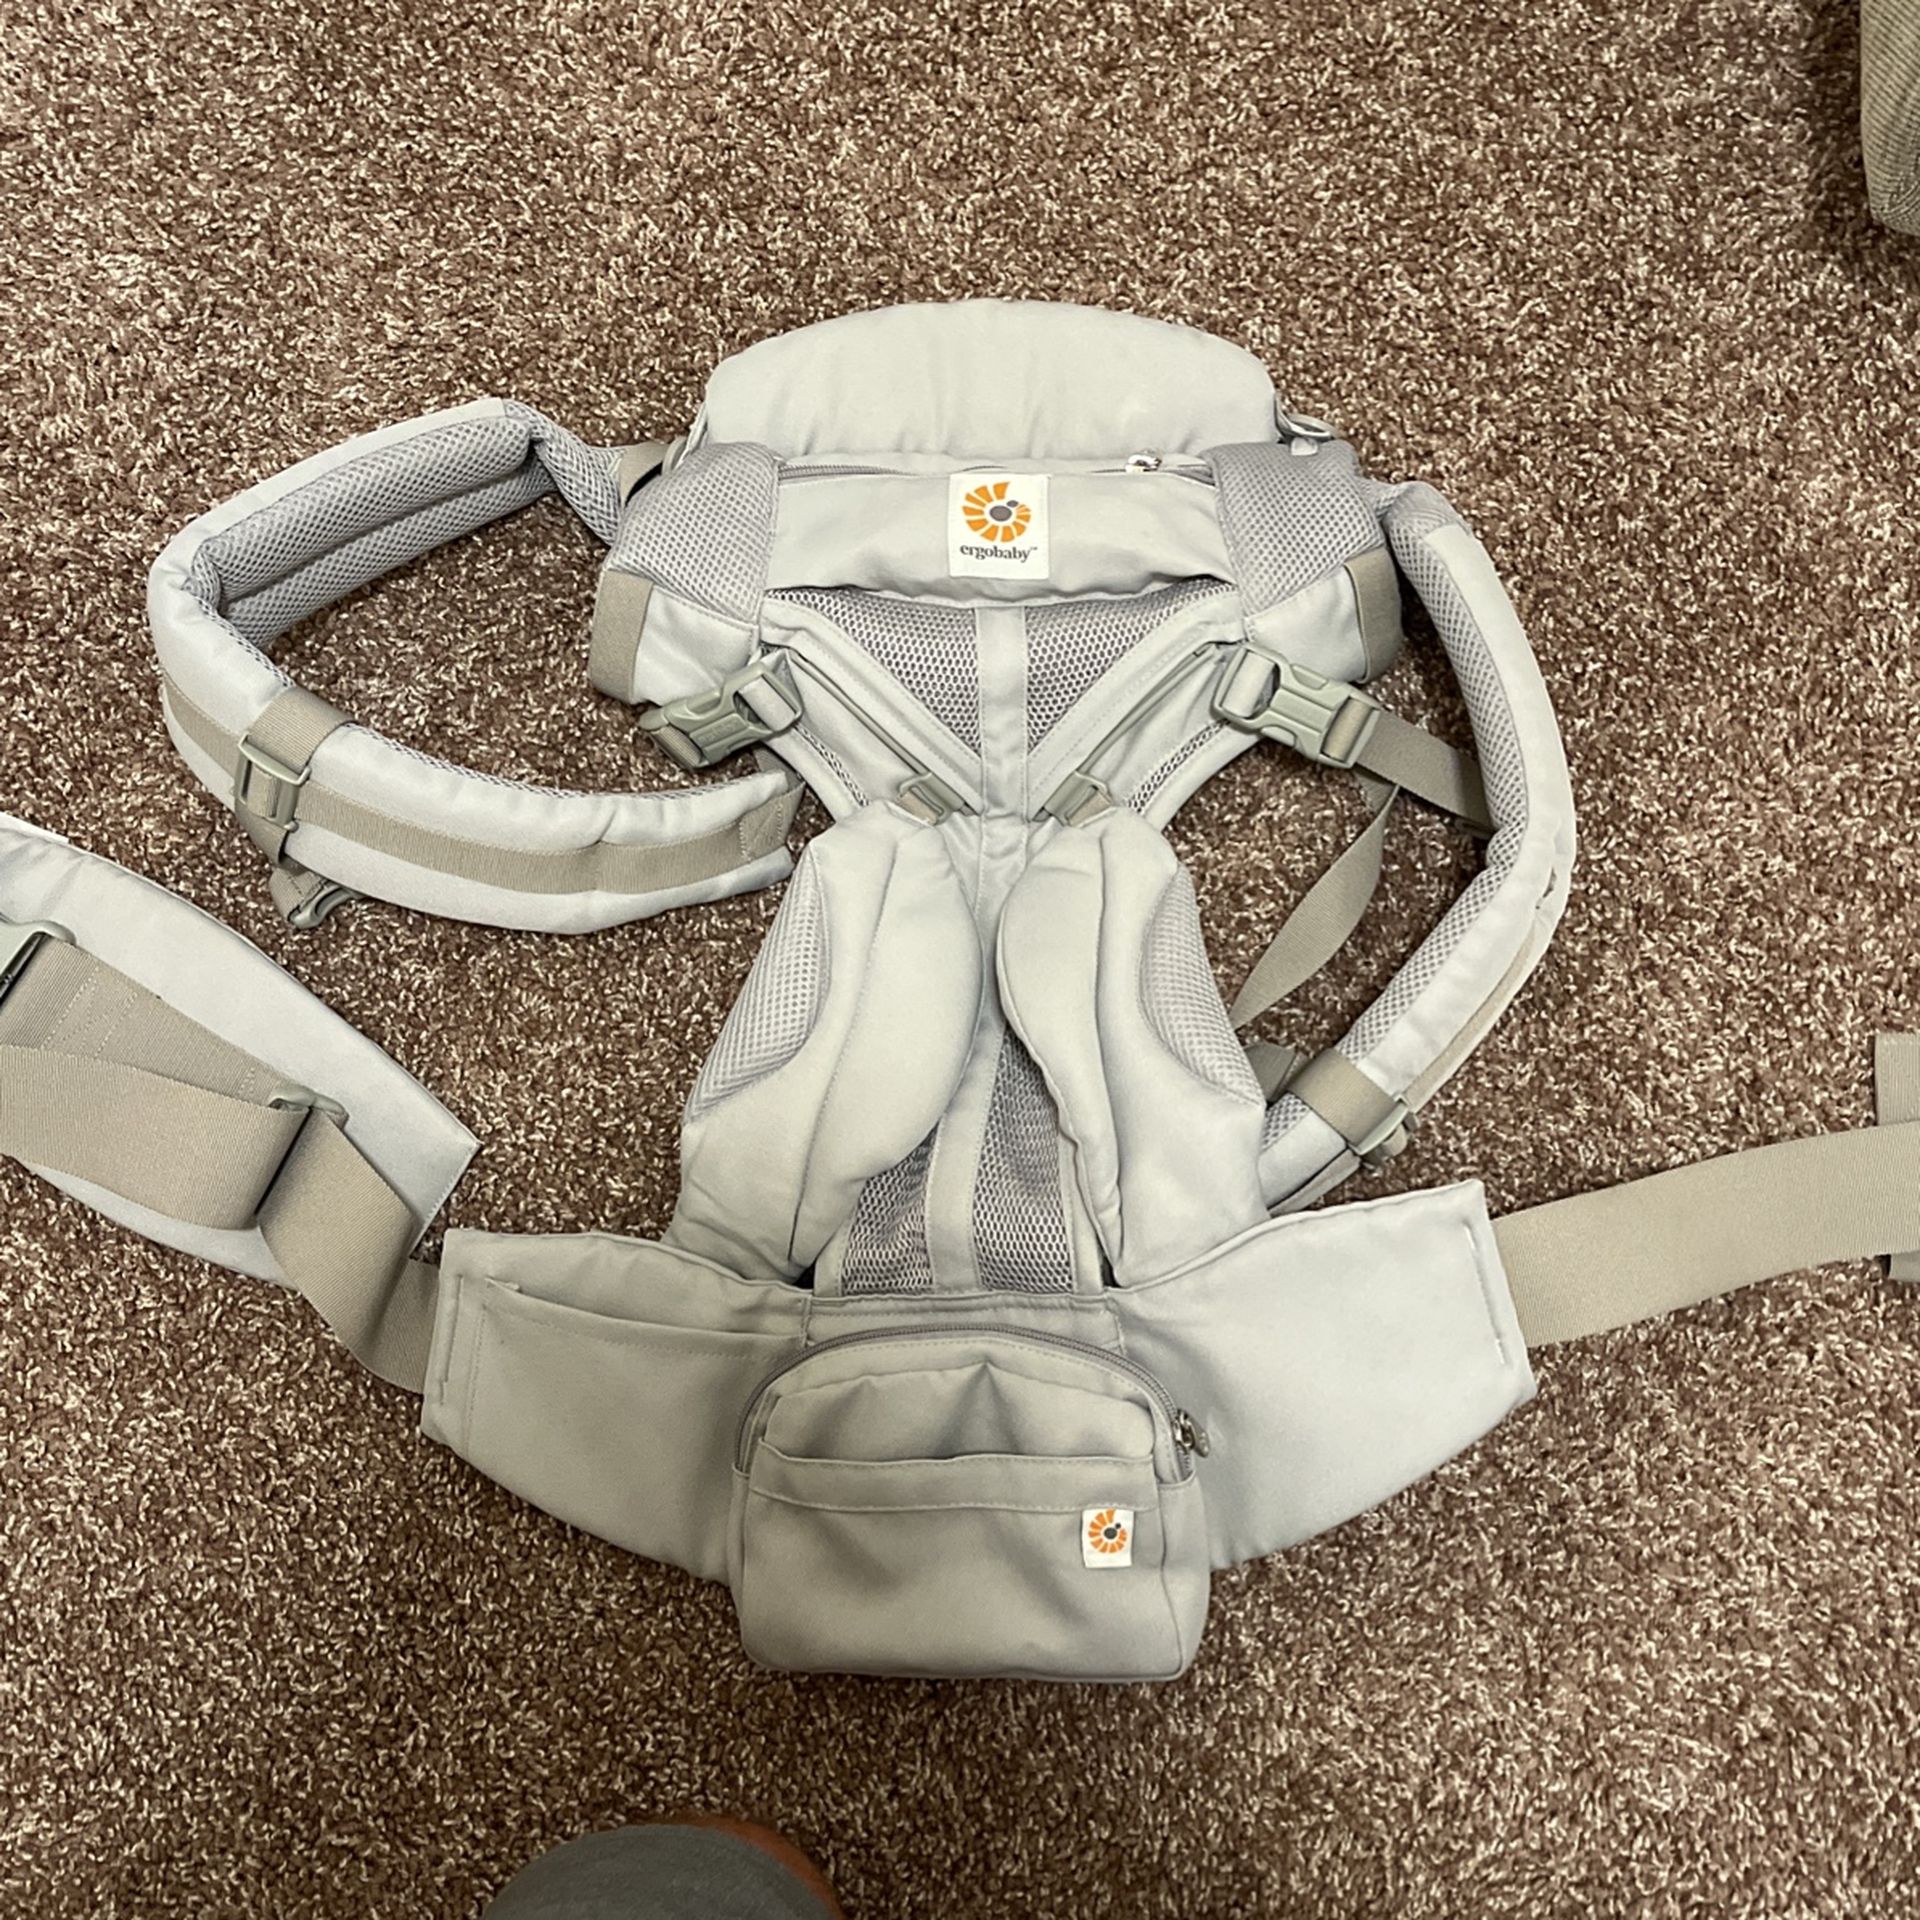 New Ergobaby Omni 360 All-Position Baby Carrier 